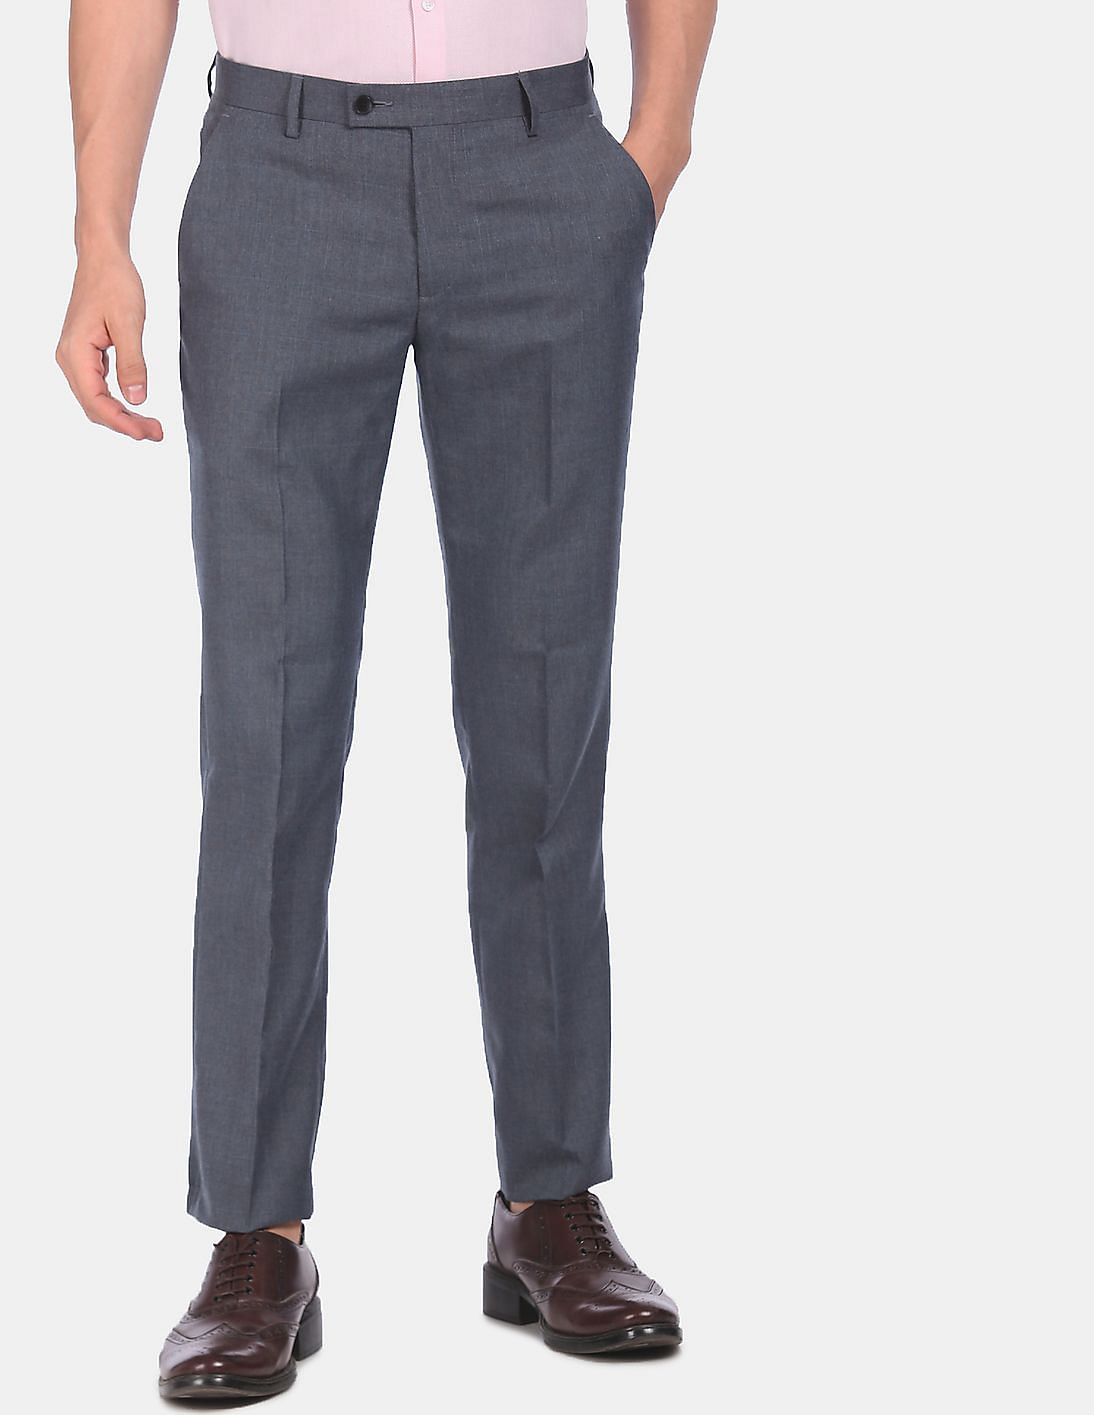 Buy Arrow Mid Rise Check Formal Trousers - NNNOW.com